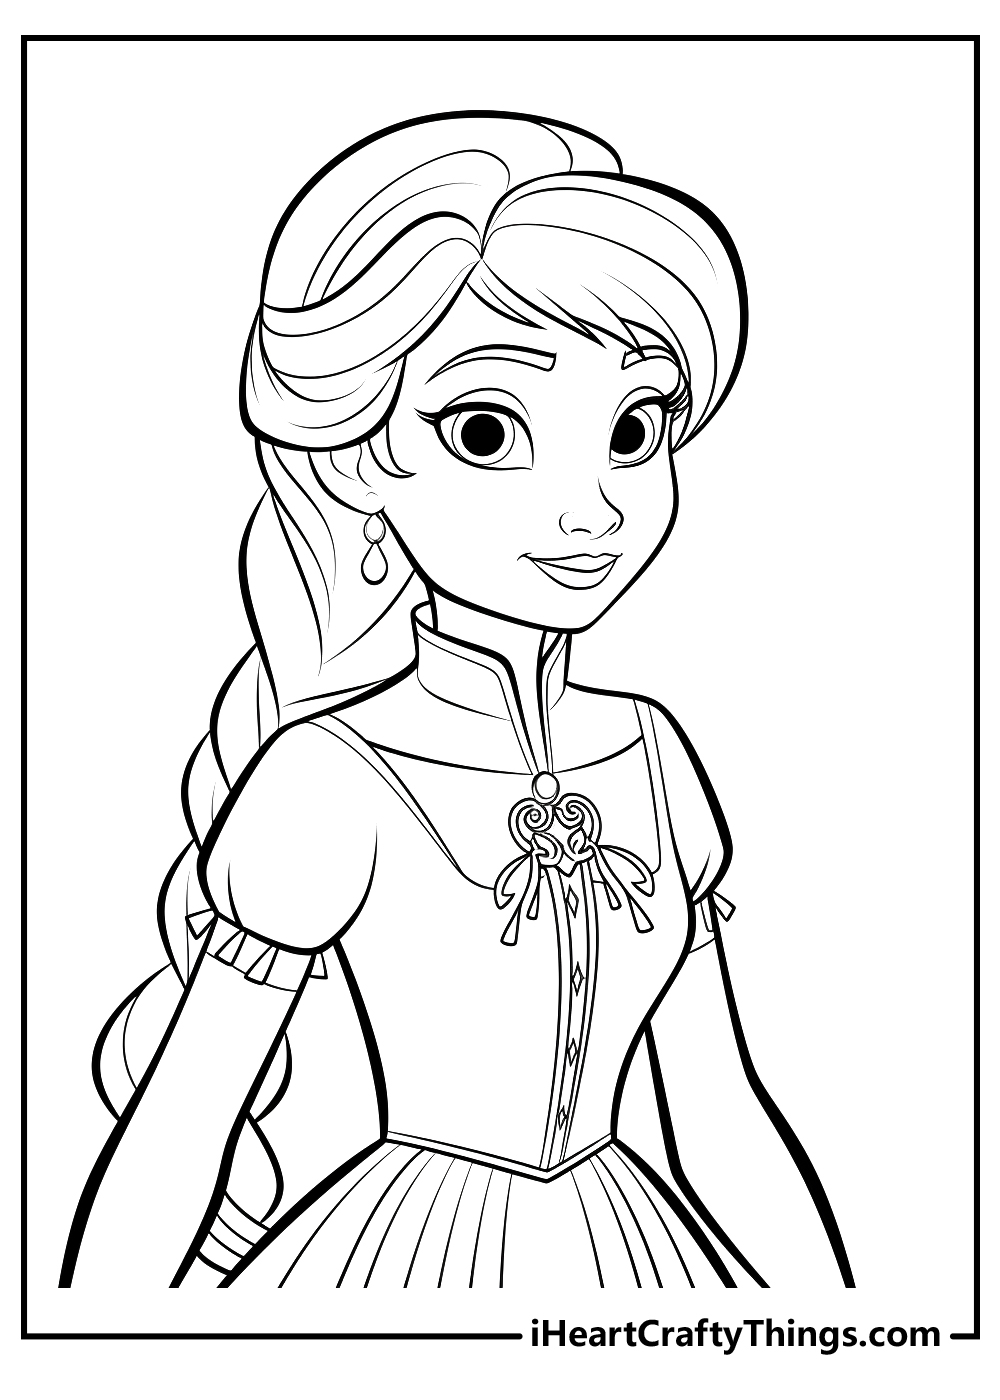 anna frozen coloring sheet free download